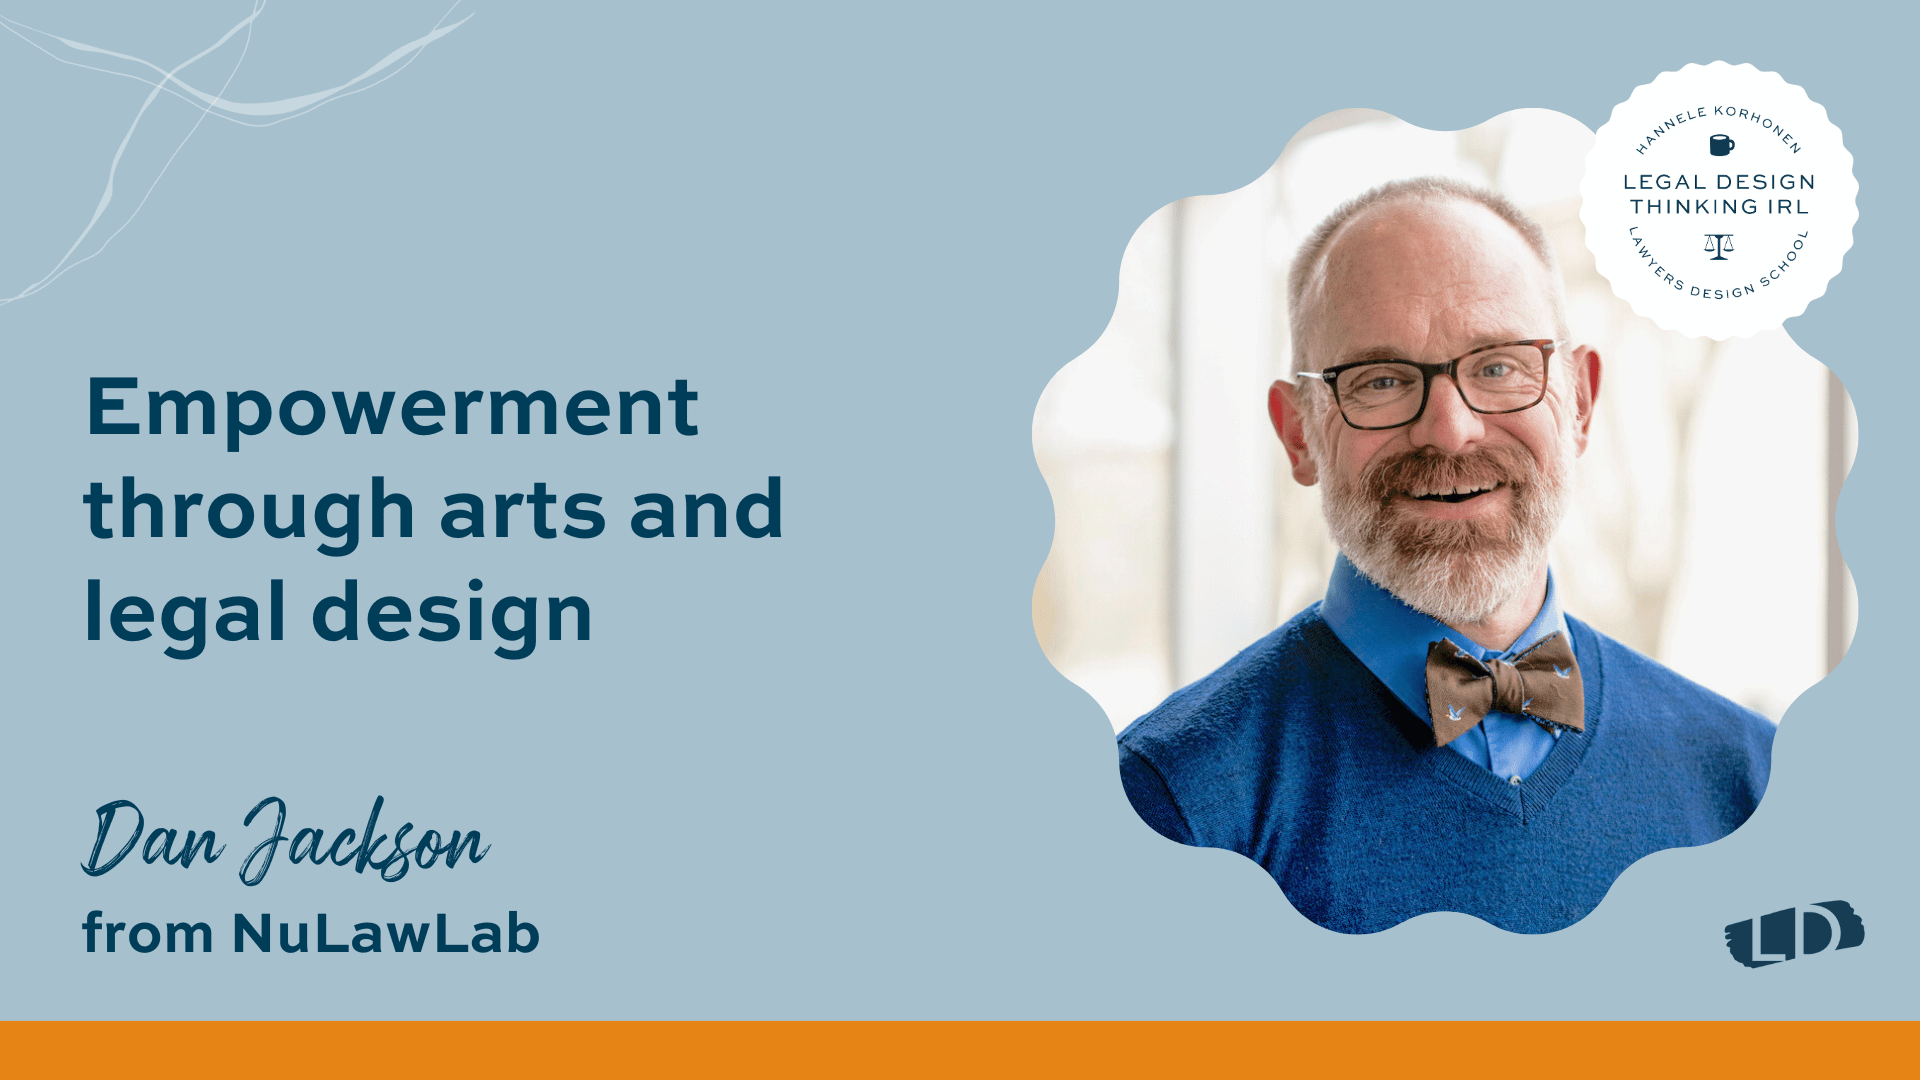 Empowerment through arts and legal design: Dan Jackson from NuLawLab